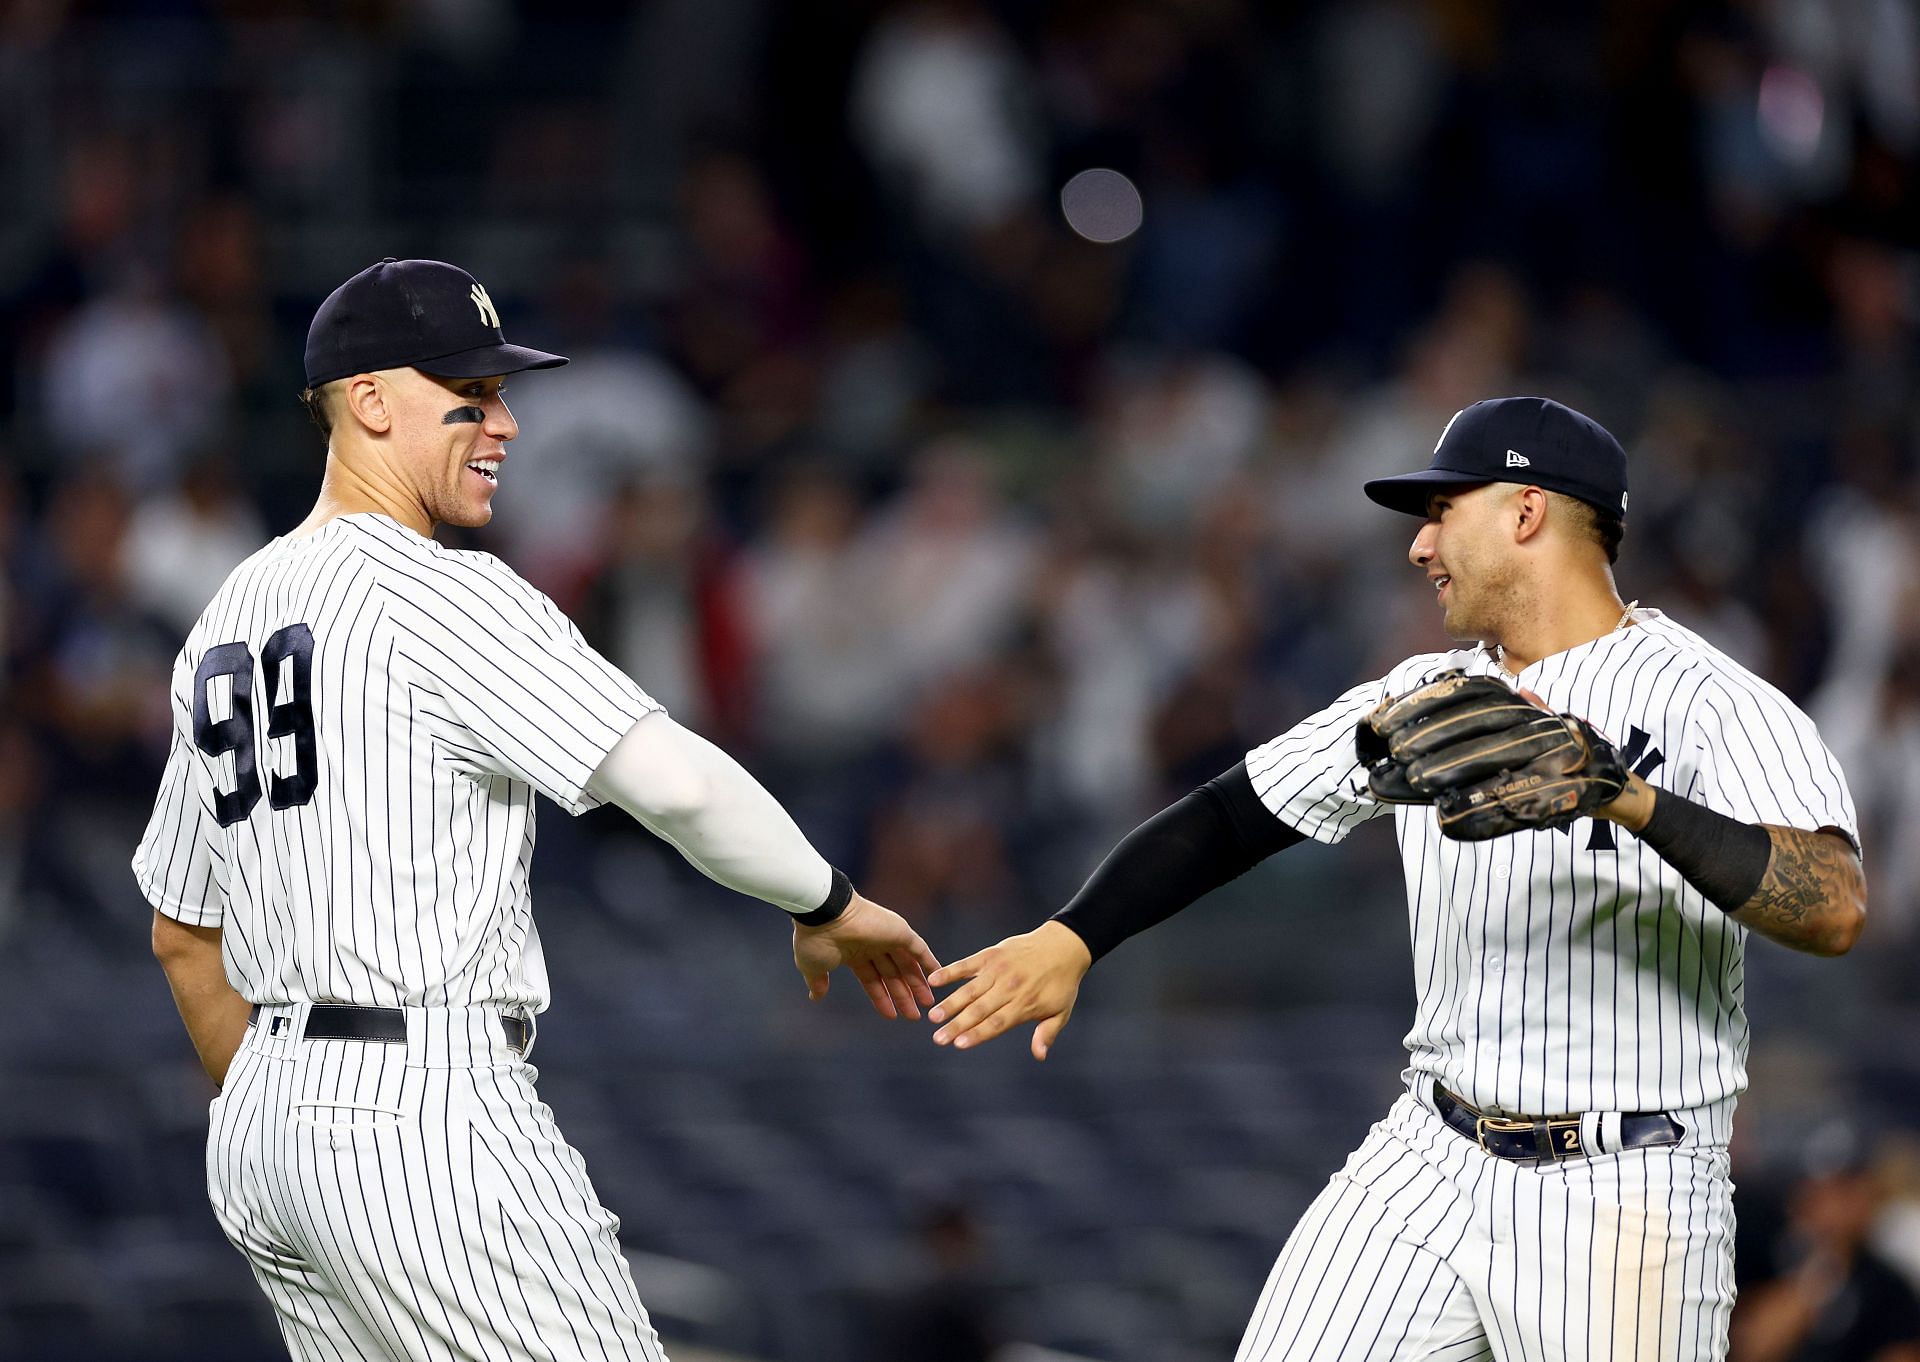 Aaron Judge #99 of the New York Yankees celebrates the win with teammate Gleyber Torres #25 after the game against the Pittsburgh Pirates at Yankee Stadium on September 21, 2022, in the Bronx borough of New York City. The New York Yankees defeated the Pittsburgh Pirates 14-2. (Photo by Elsa/Getty Images)